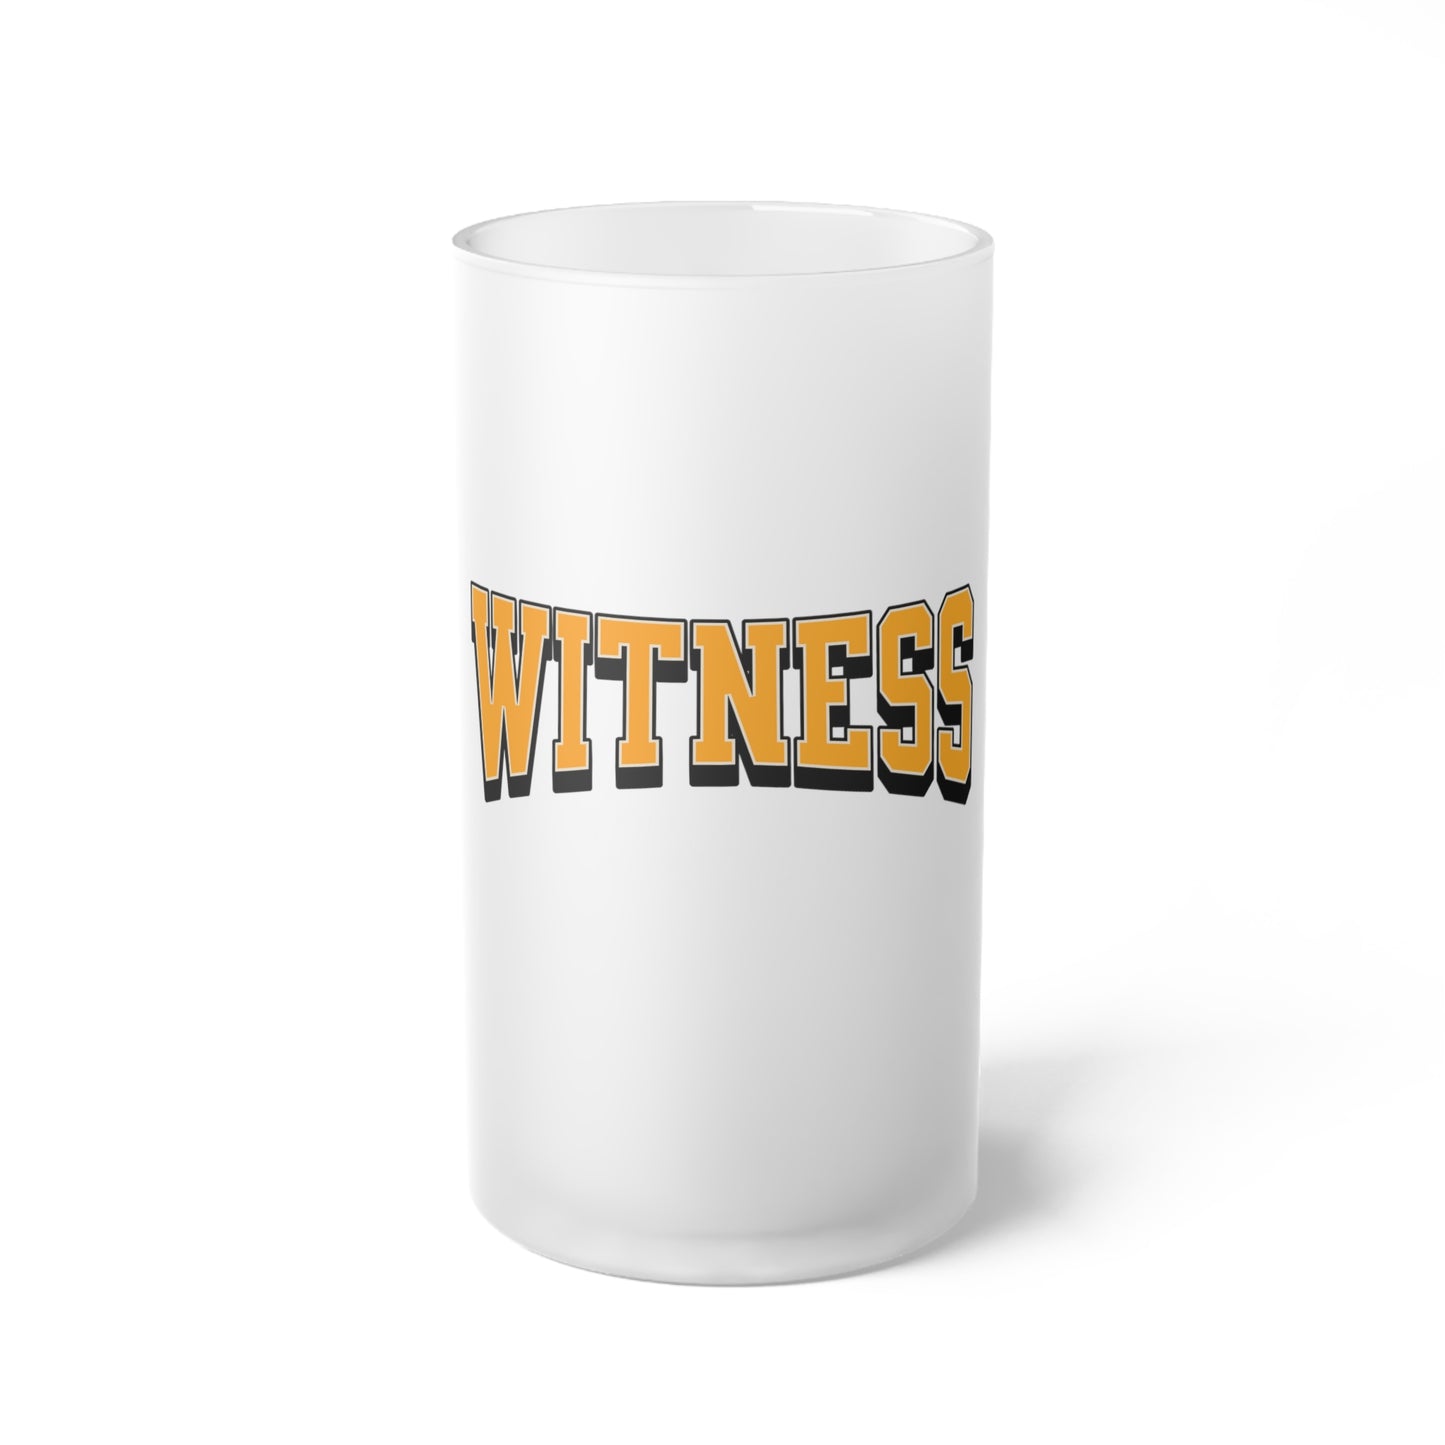 WITNESS Frosted Glass Root Beer Mug